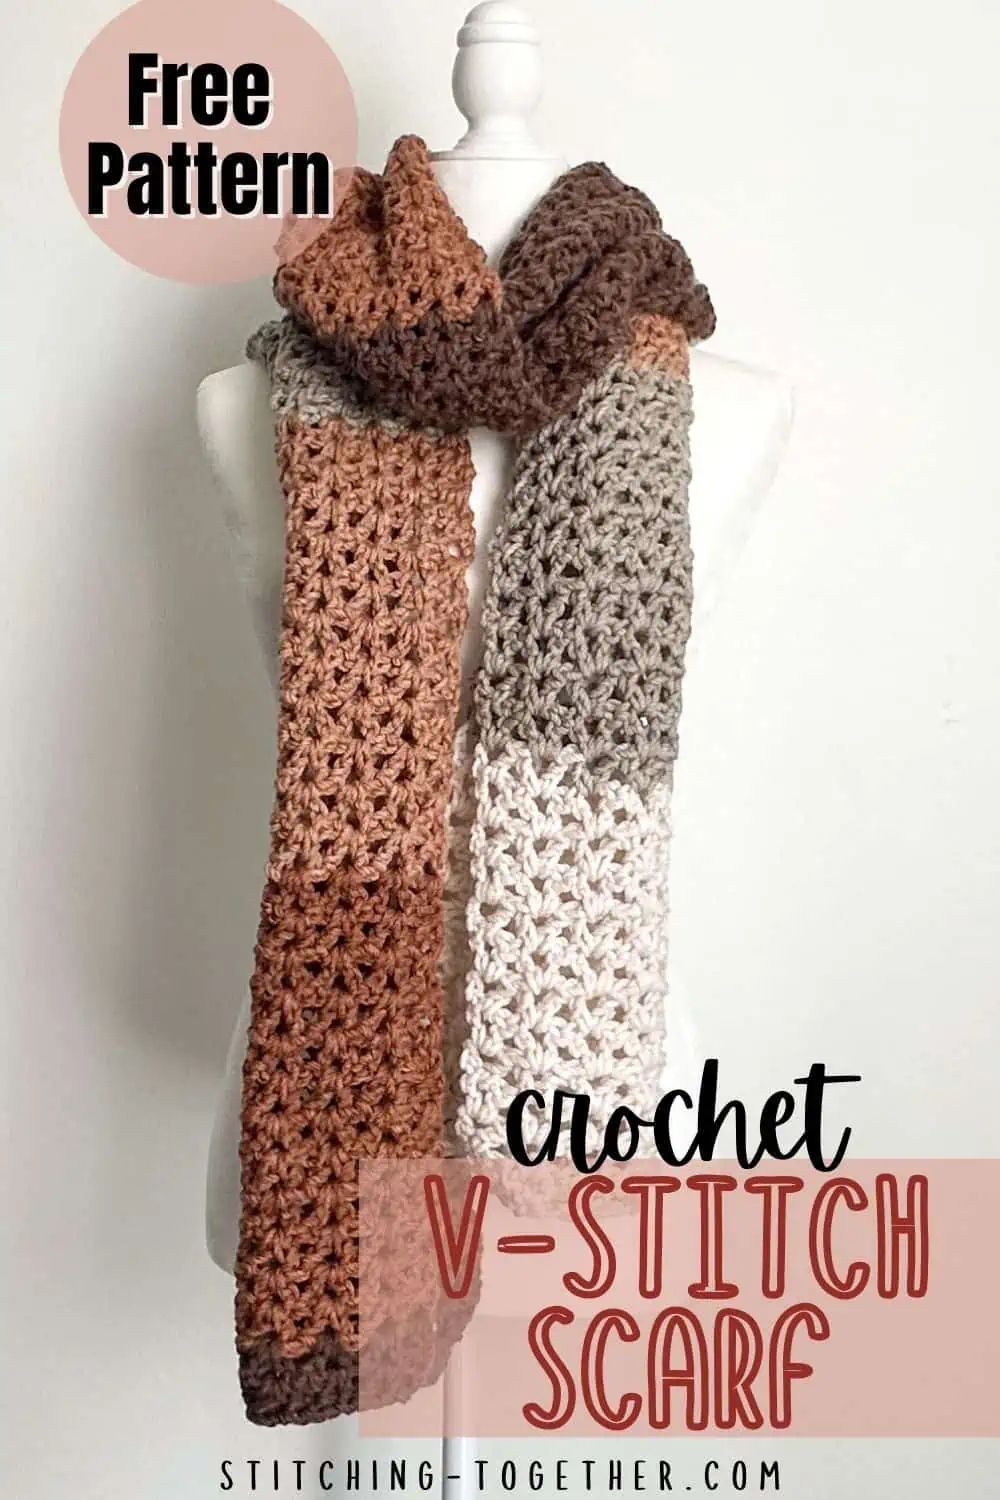 fall chunky v stitch scarf on a headless mannequin with text overlay reading "free pattern, crochet v-stitch scarf"